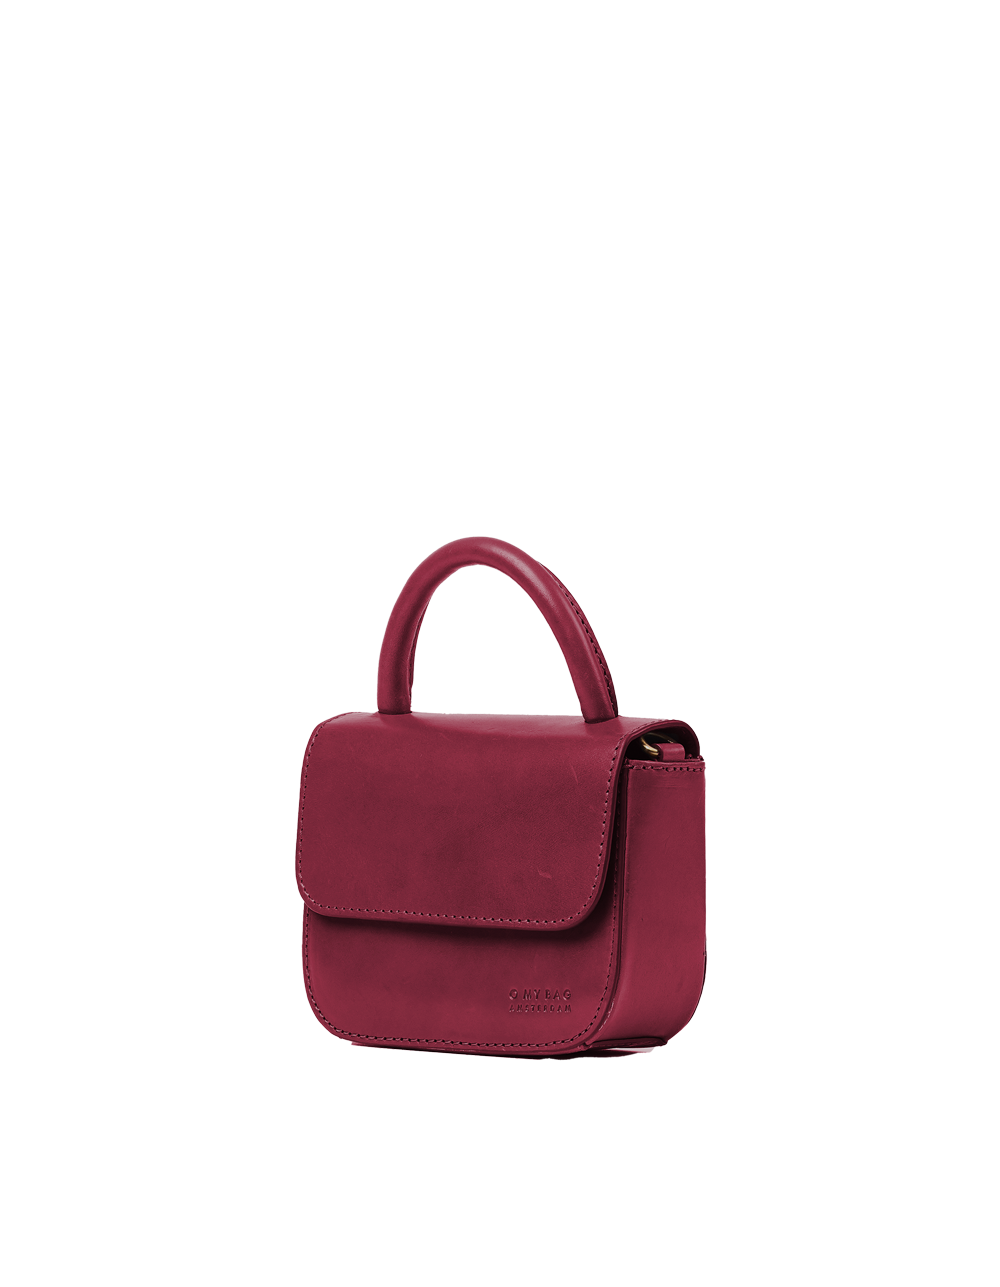 Nano Bag Ruby Classic Leather. Small clutch handbag, party bag. Side product image.